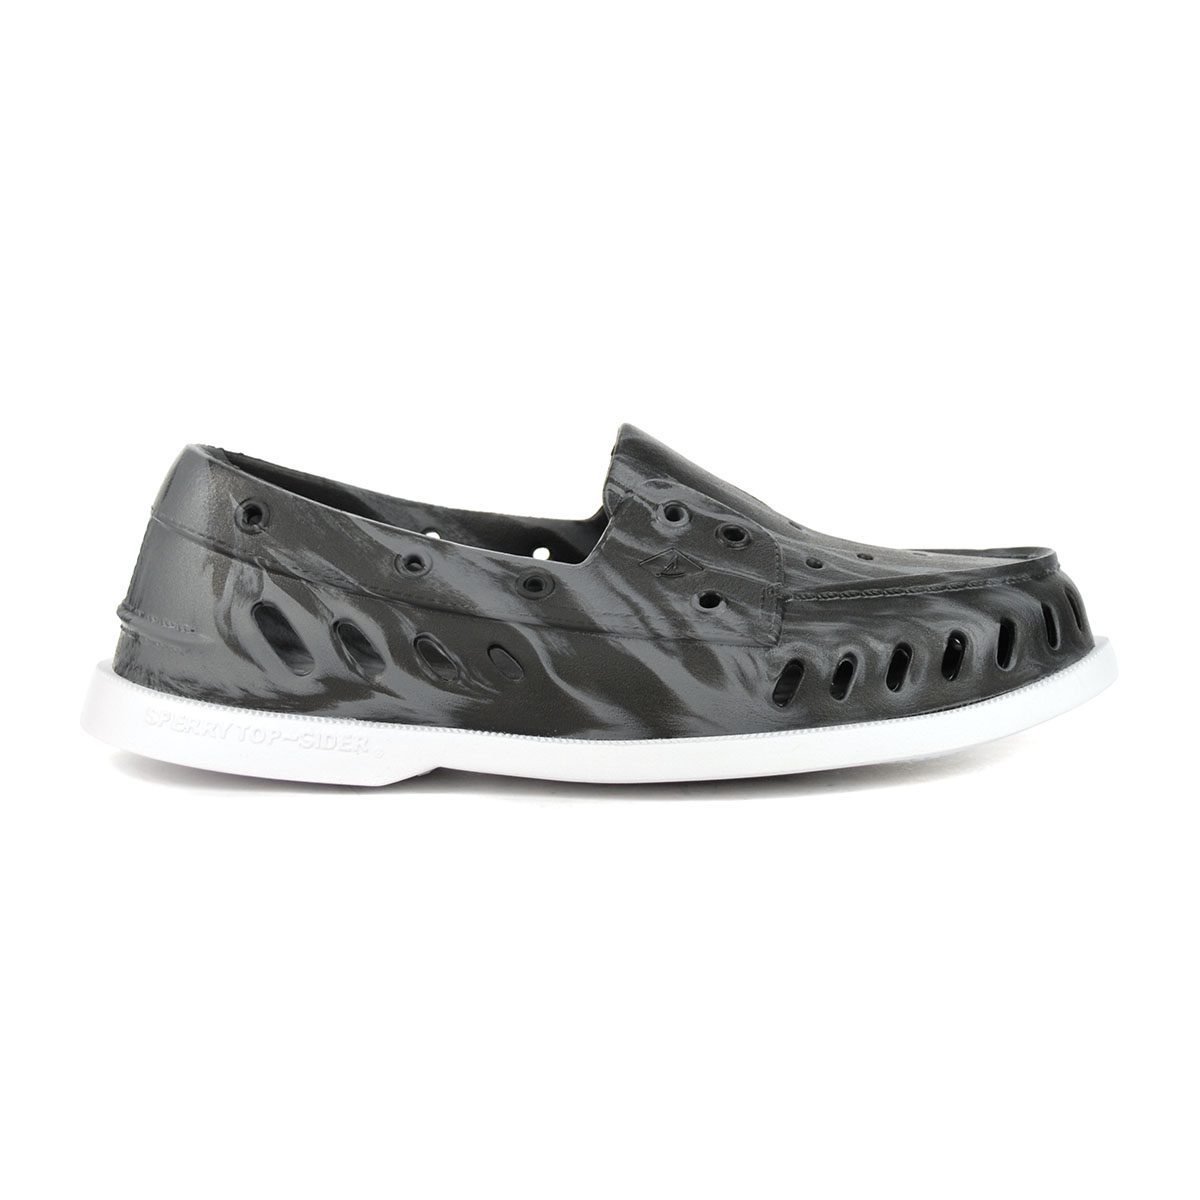 Sperry Men's Authentic Original Float Black/Grey Marbled Boat Shoes ...